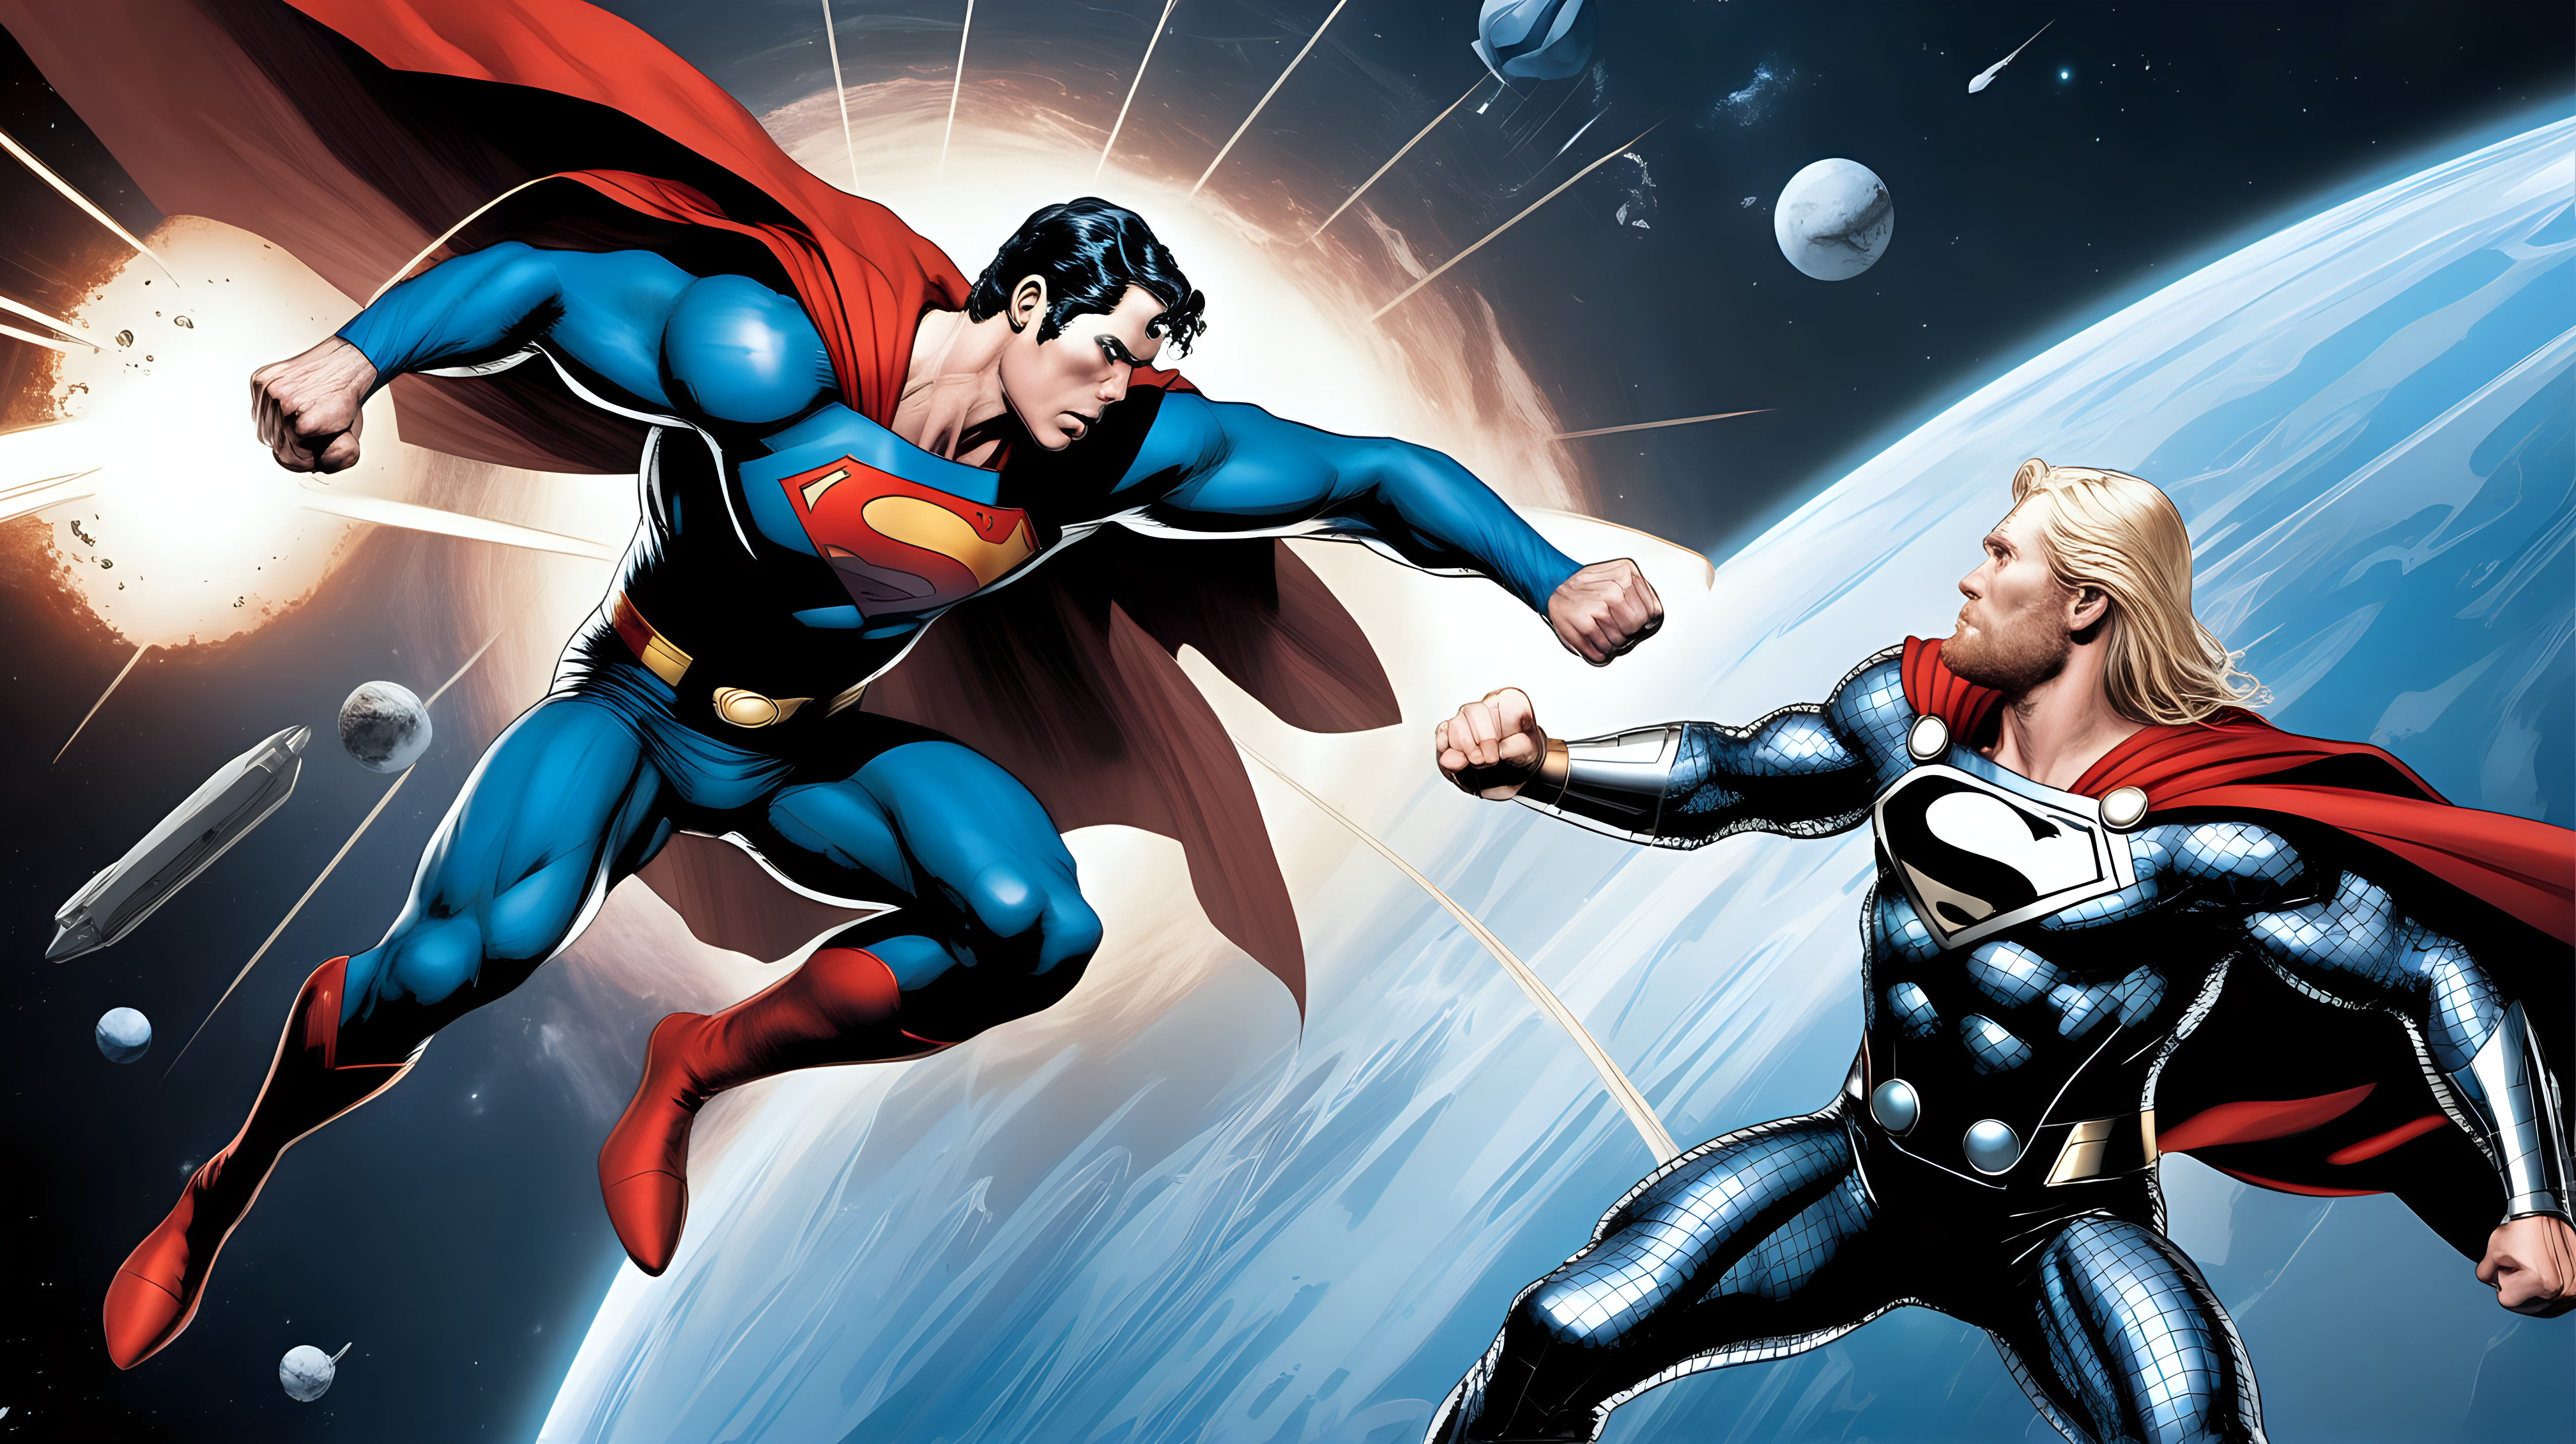 Superman fights Thor in space